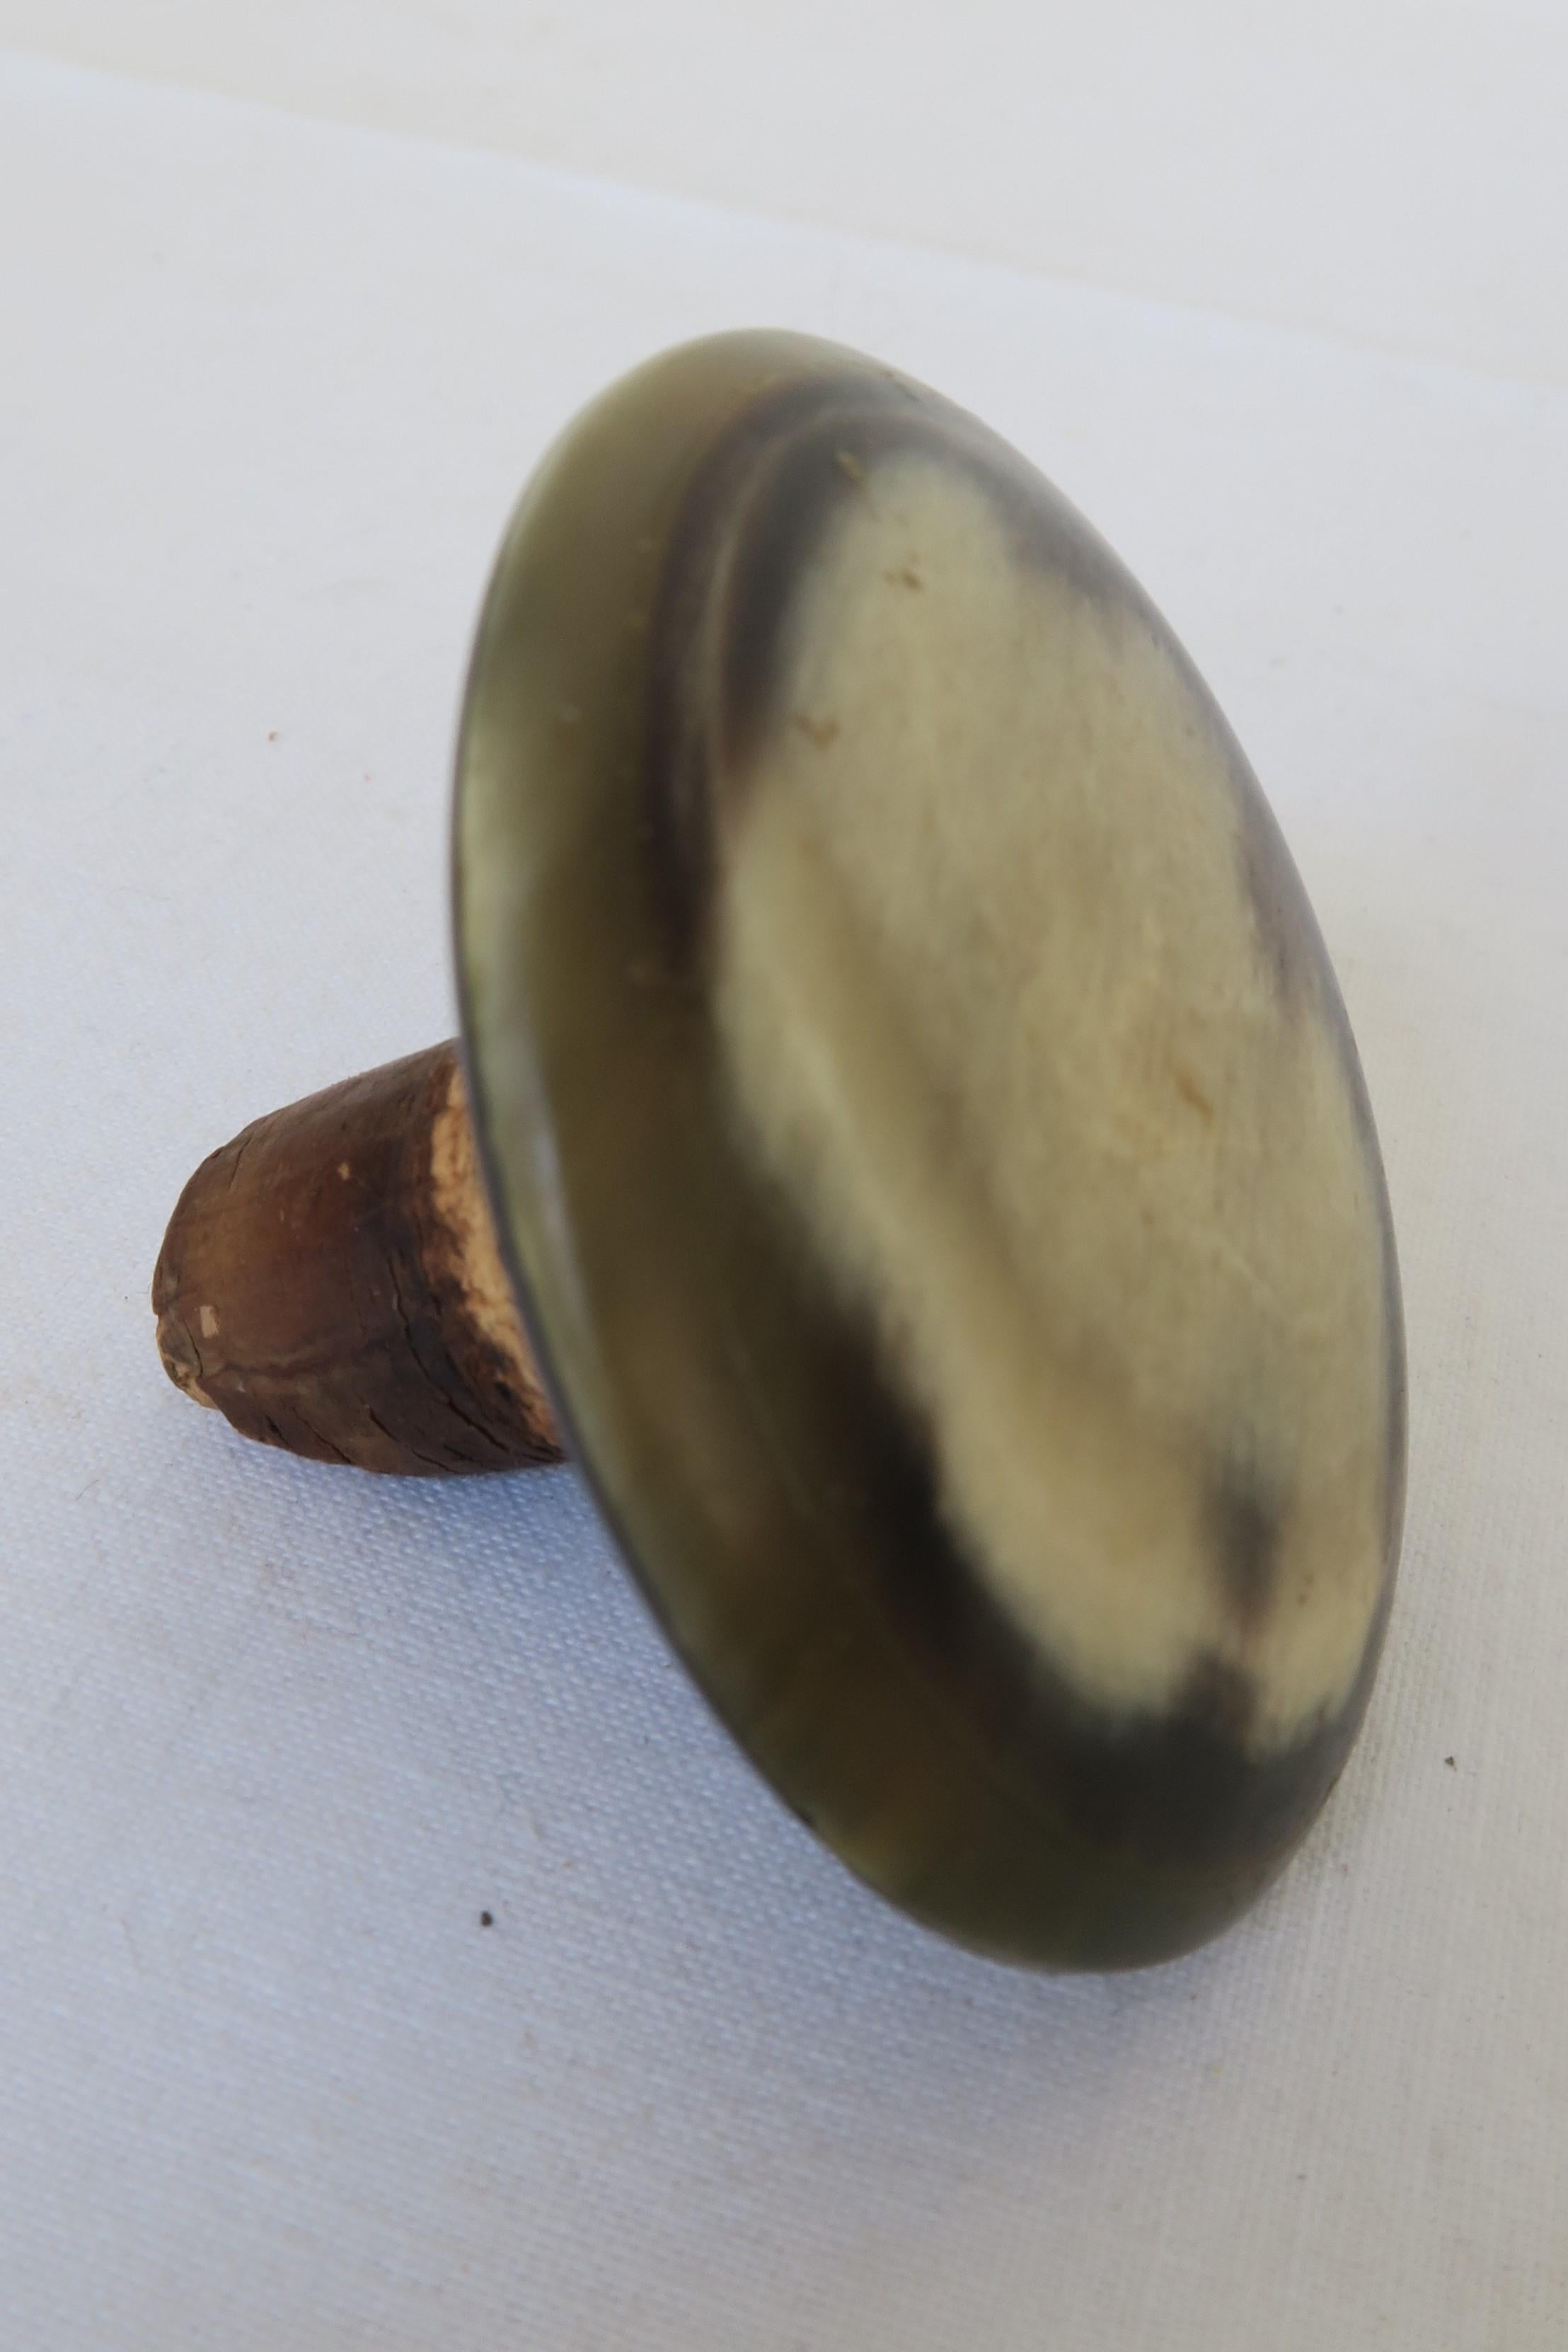 For sale is a unique piece of Mid-Century Modern design. The bottle stopper was carefully hand carved out of horn. They were produced in the renowned Austrian workshops of Bauhaus-influenced designer Carl Auböck. The polished base of the bottle